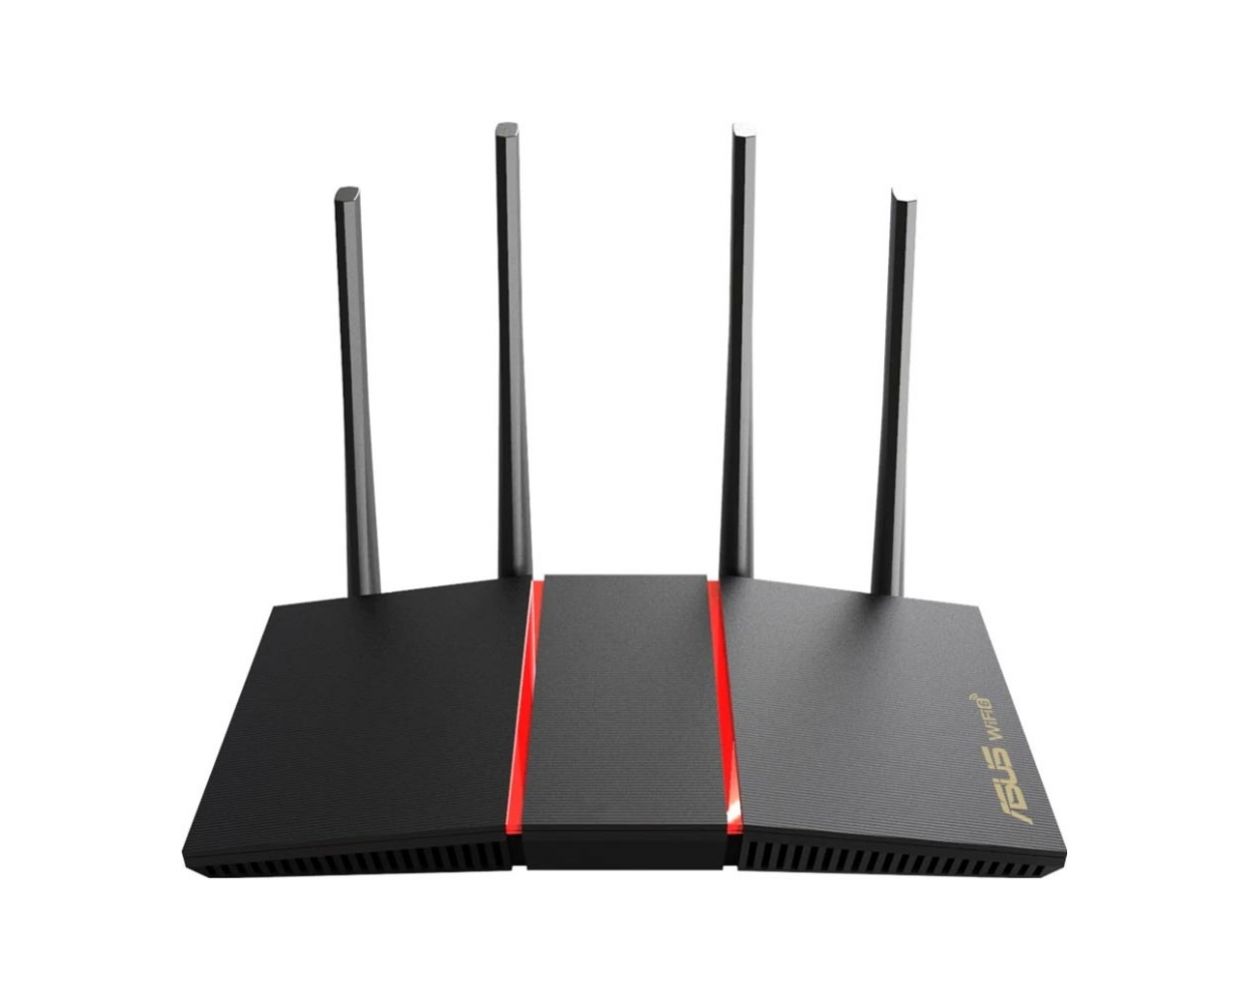 ASUS Routers